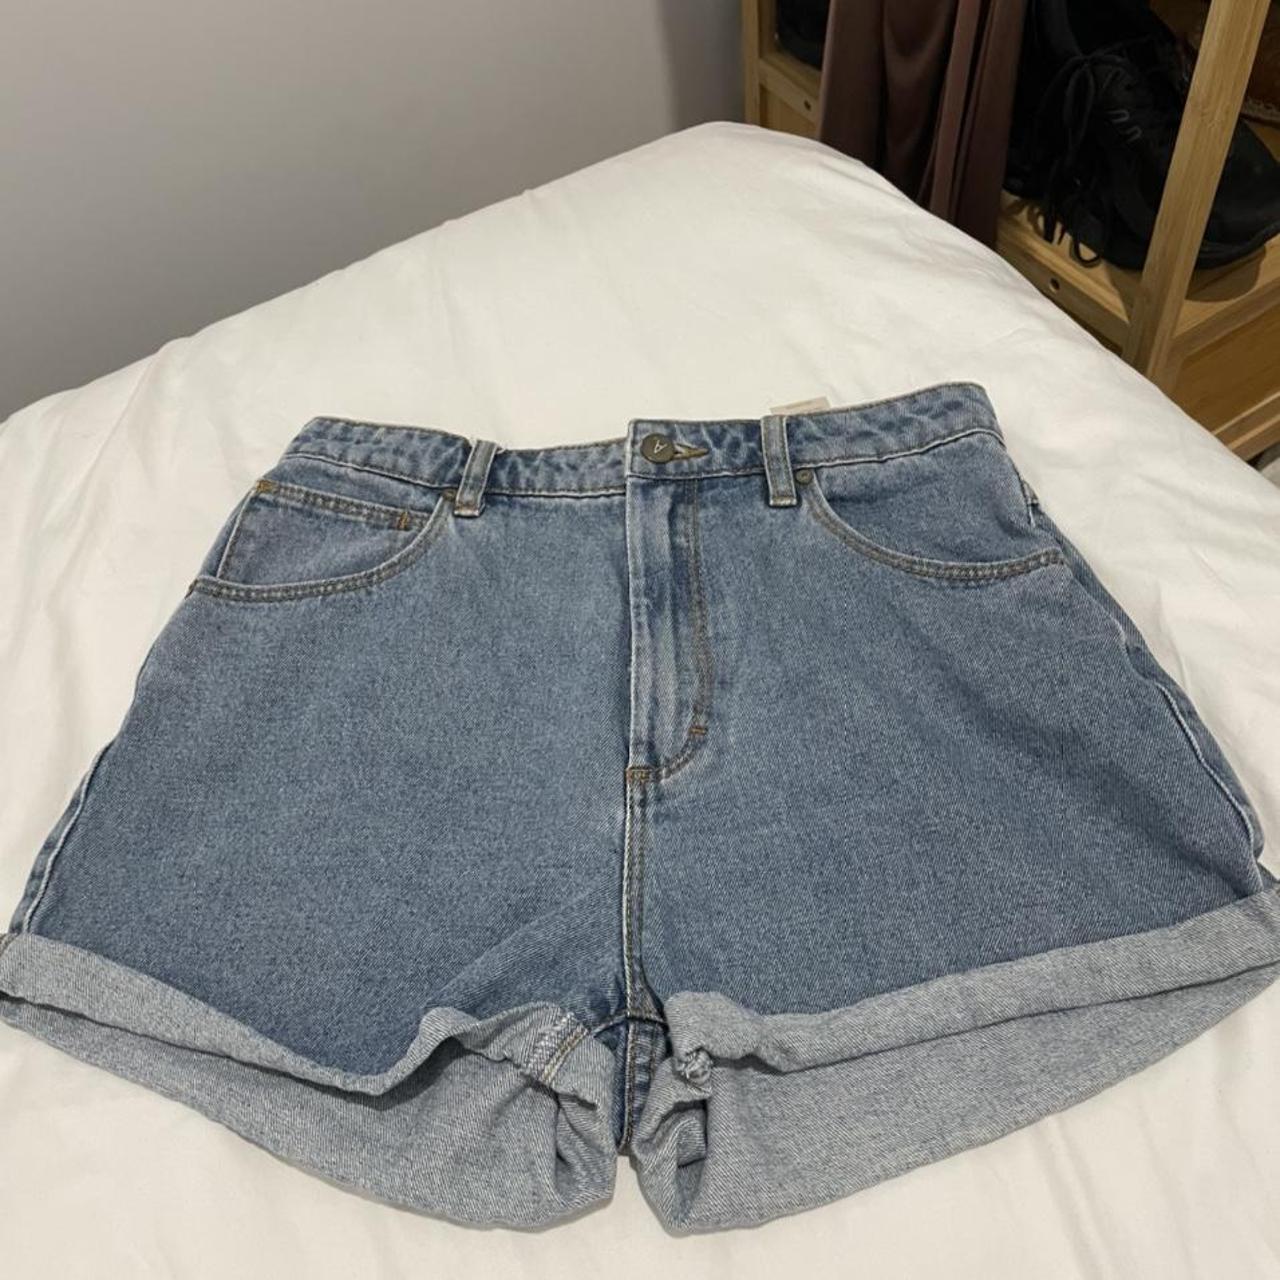 Abrand jeans shorts. In near perfect condition. Size... - Depop